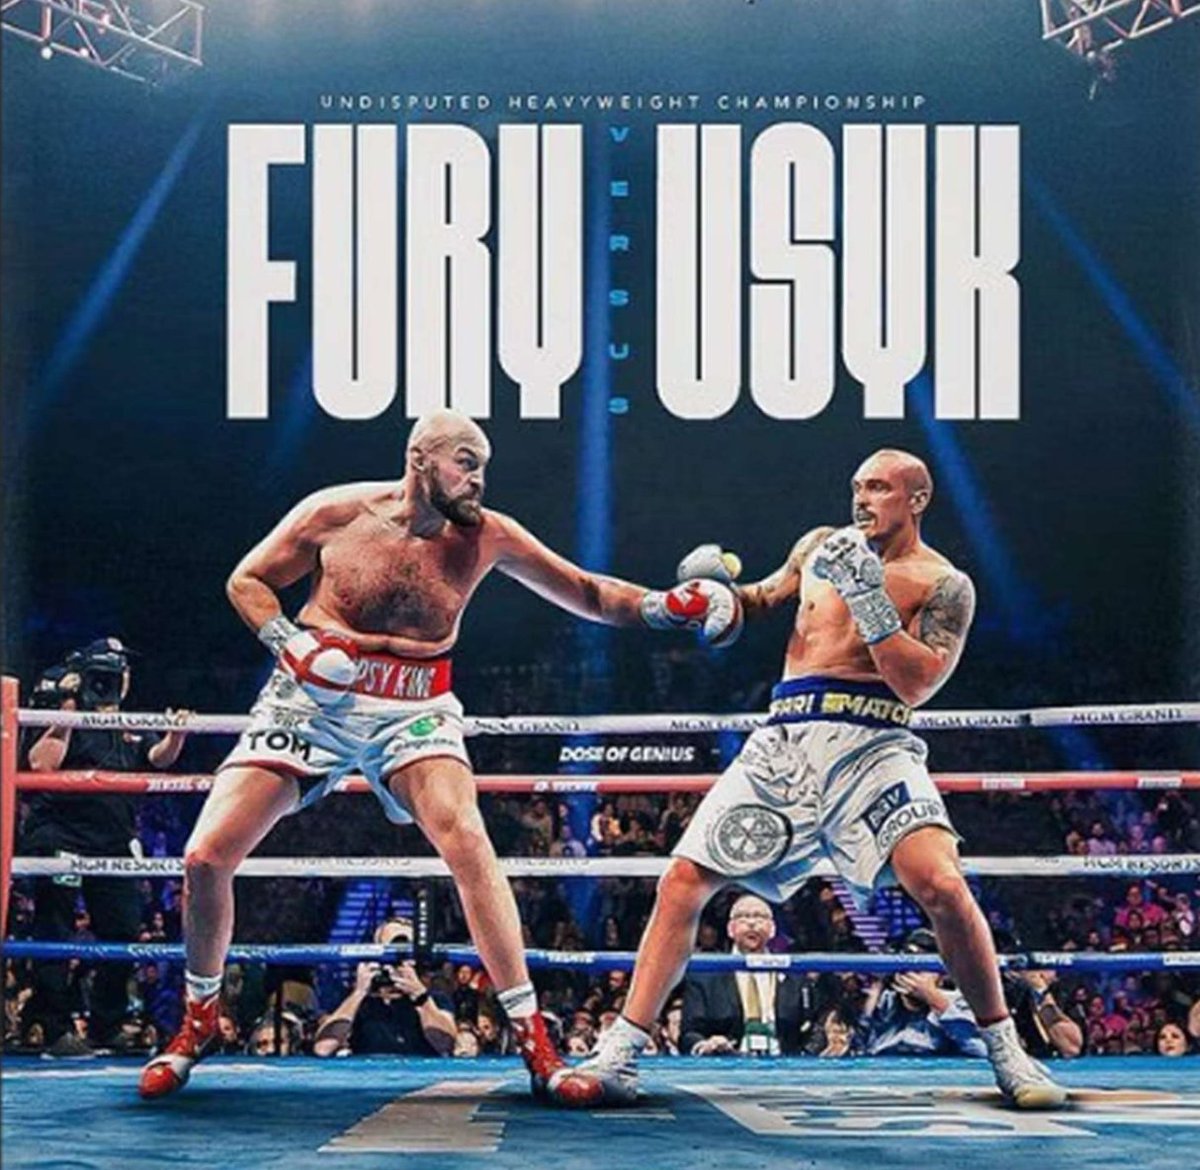 Interesting fact: @Tyson_Fury vs. @usykaa will only be the 15th time an undisputed heavyweight title fight has been scheduled for 12 rounds. Given that 15 rounders stopped for good in 1987, that shows you how rare an undisputed fight is in this division #FuryUsyk 🇬🇧🥊🇺🇦